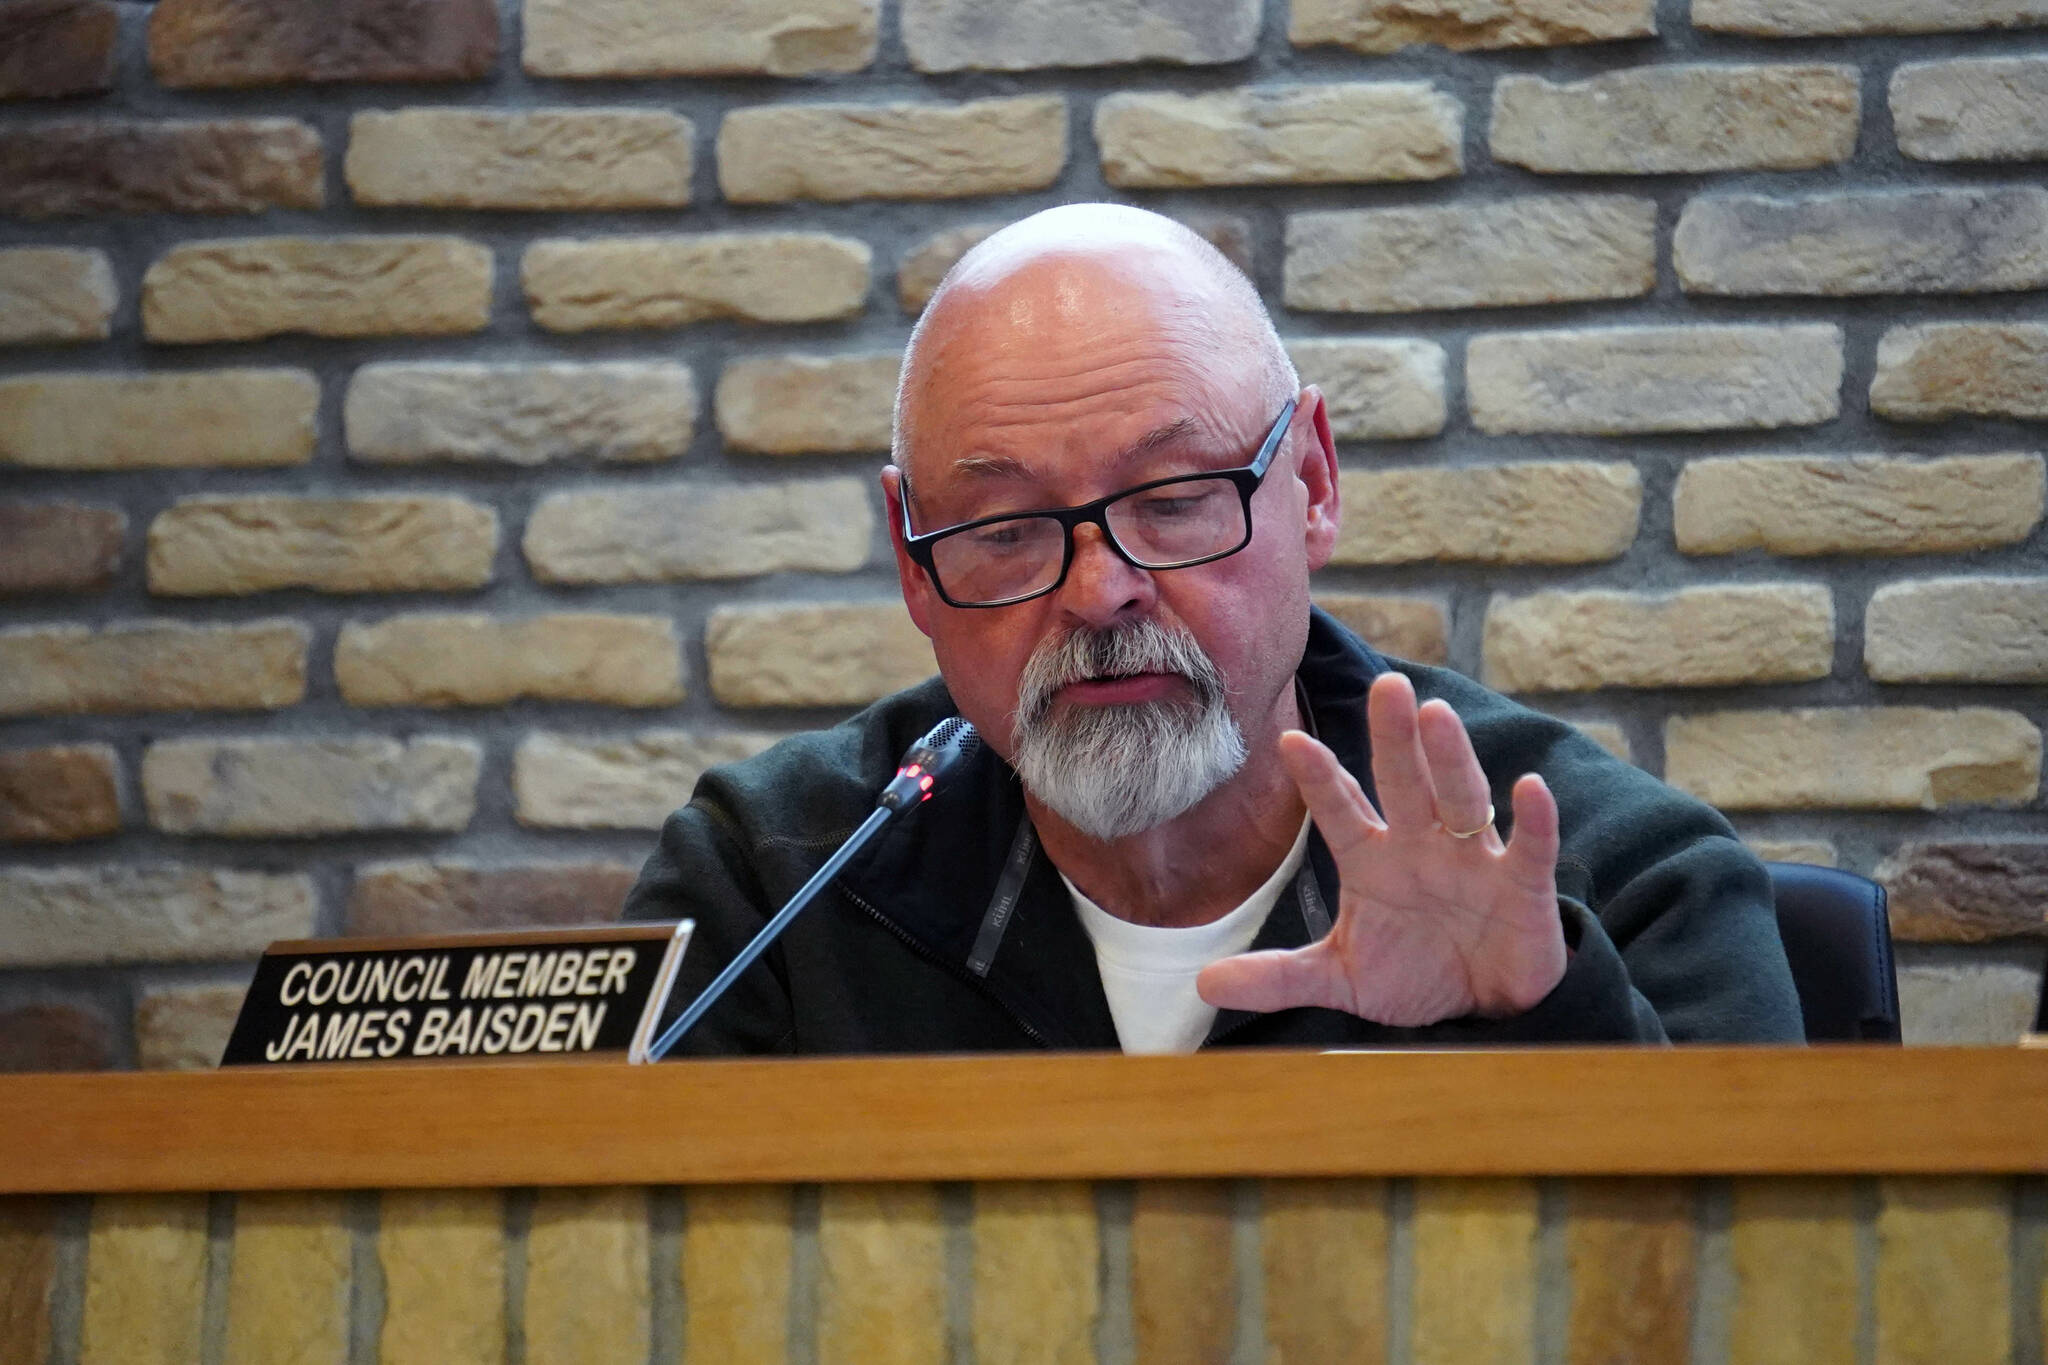 Council member James Baisden speaks in favor of an amendment to the City of Kenai’s budget that would add funds for construction of a veteran’s memorial column in the Kenai Cemetery during a meeting of the Kenai City Council in Kenai, Alaska, on Wednesday, June 5, 2024. (Jake Dye/Peninsula Clarion)